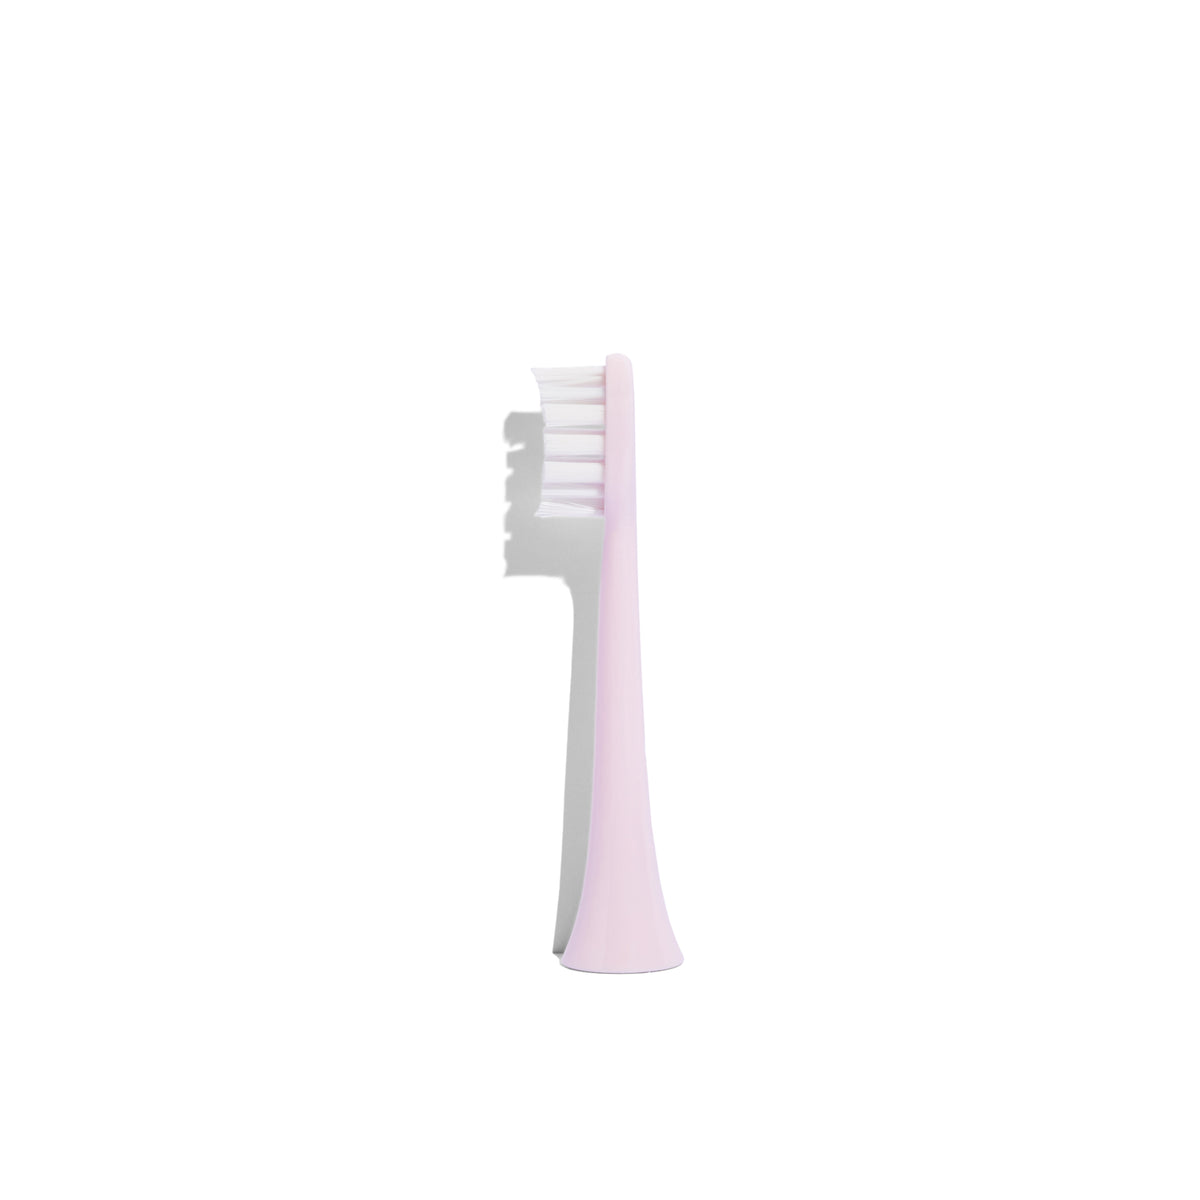 Gem Electric Toothbrush Replacement Heads: Coconut